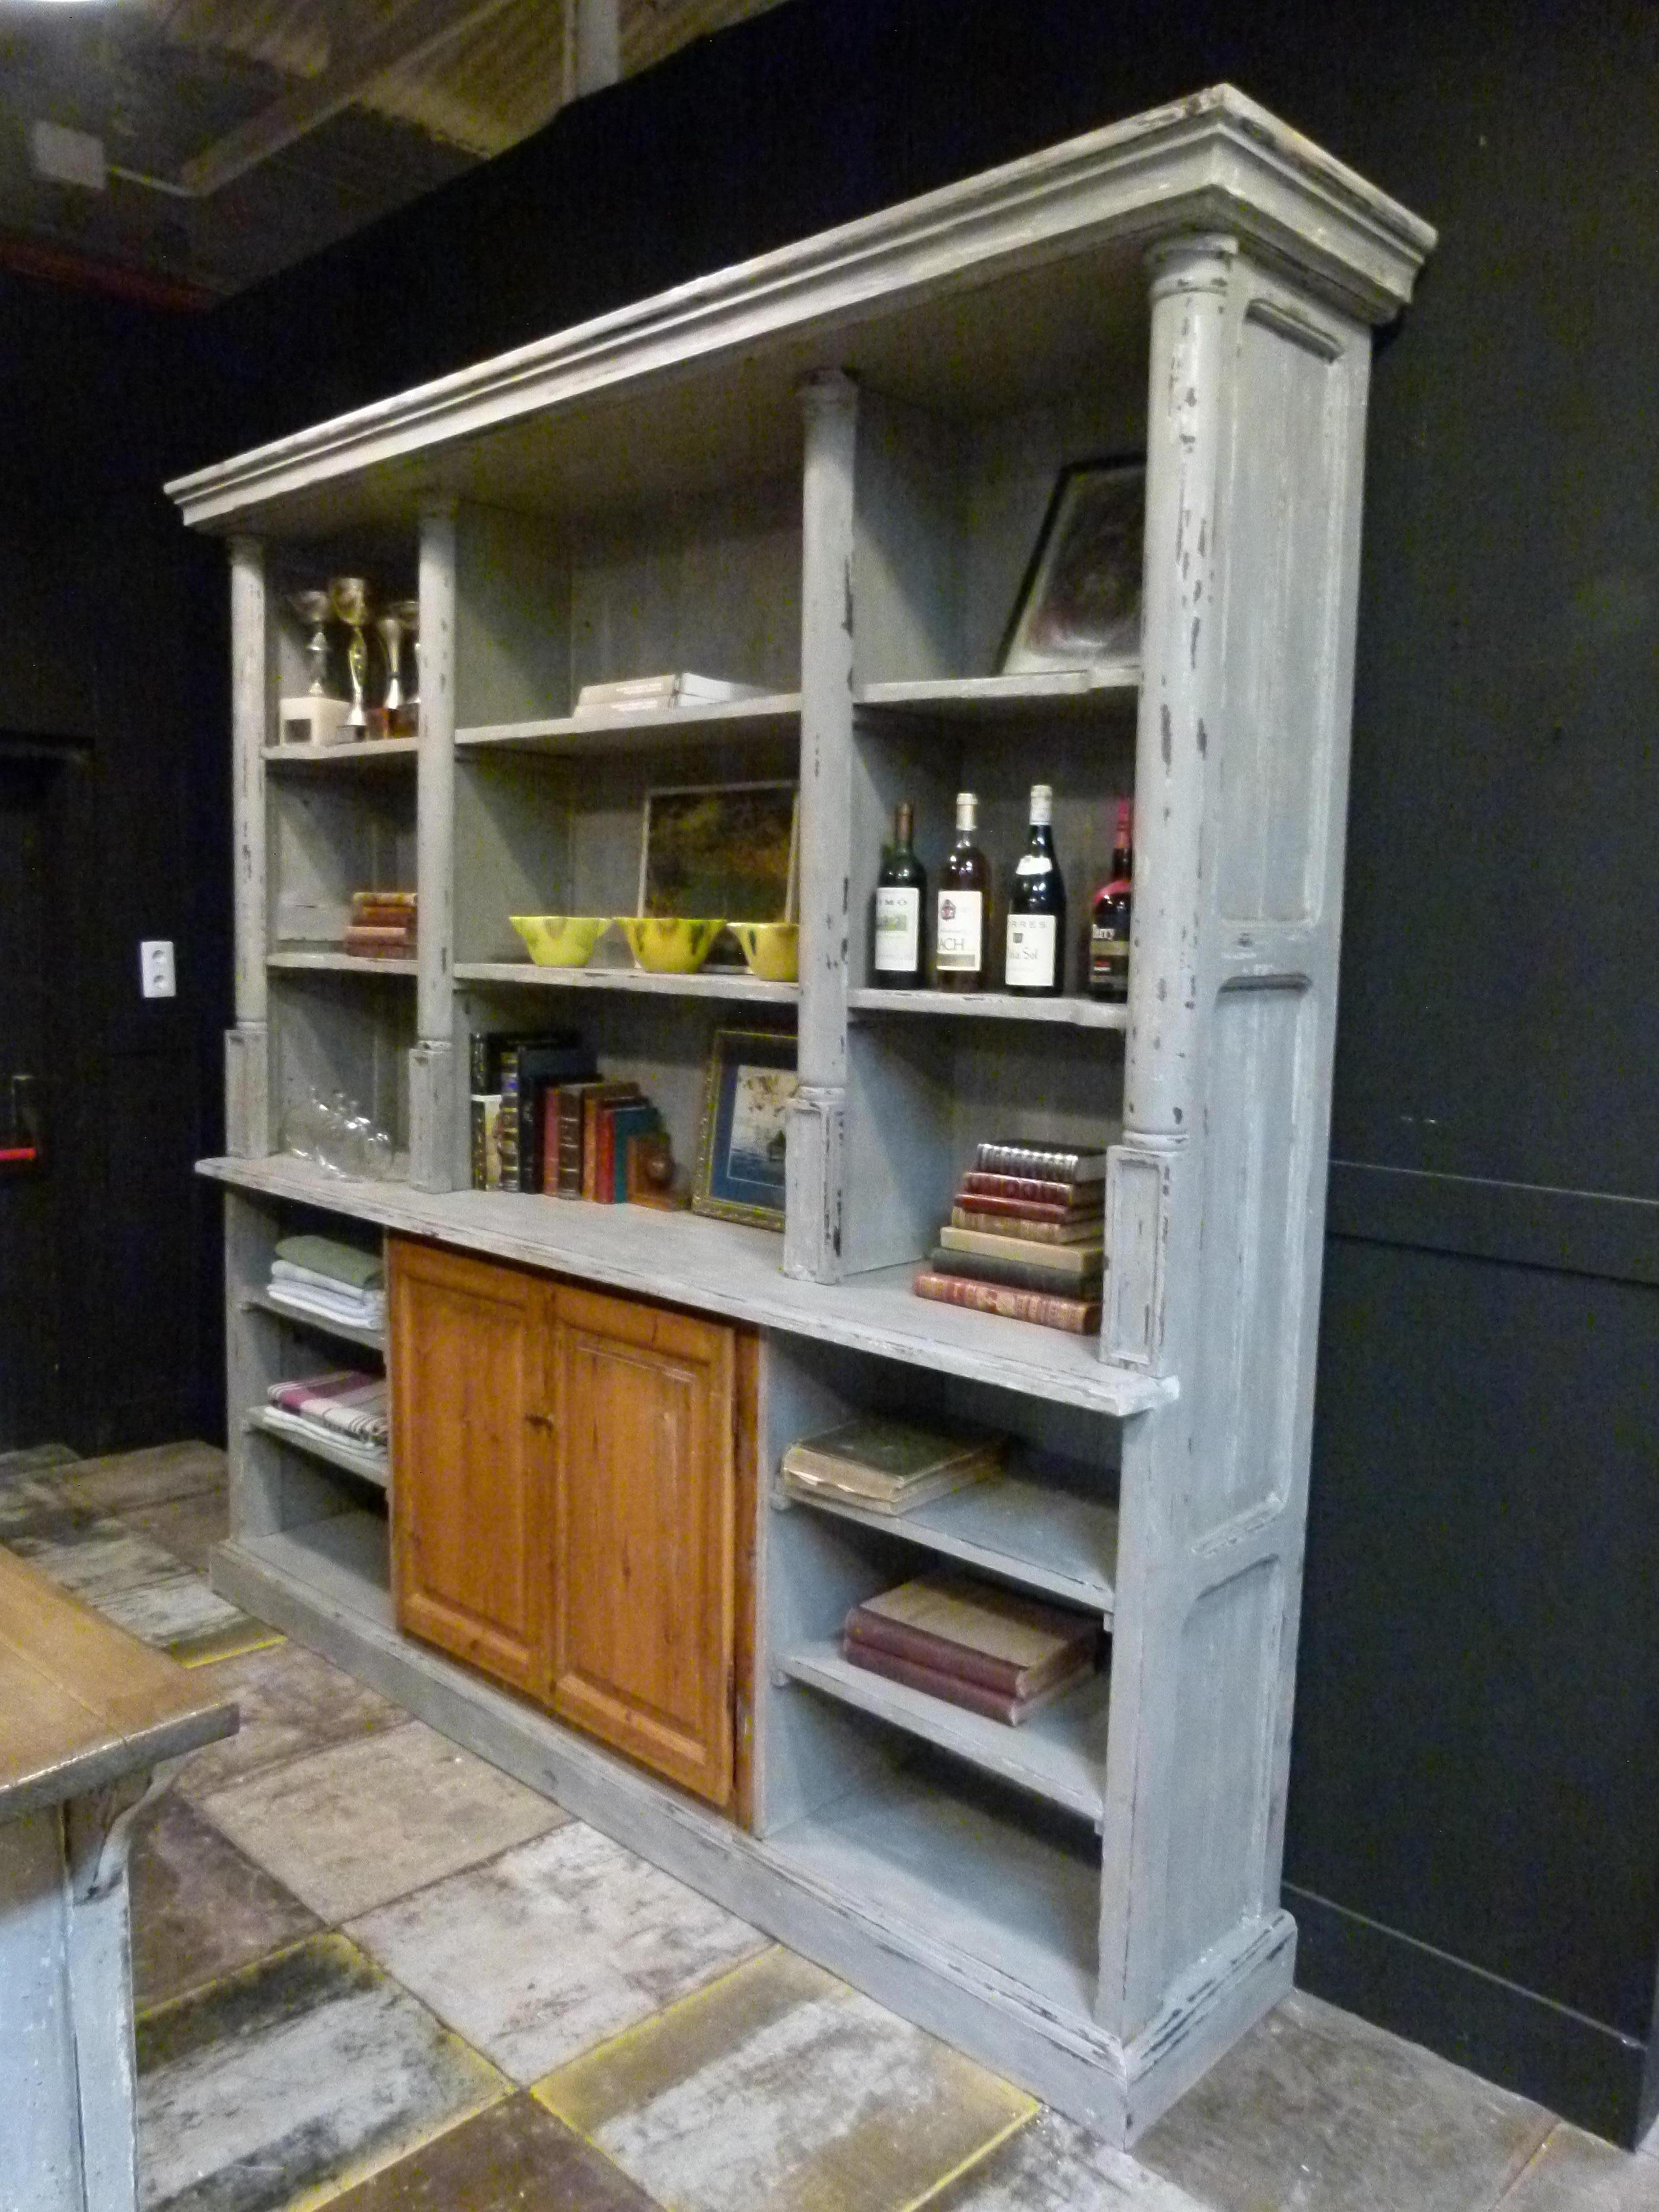  19th century french cupboard with a nice white patina.
 It comprises  lot of space for books or just keeping. There is central  lower cupboard with two wooden doors which are left  in its  natural wood color.



  